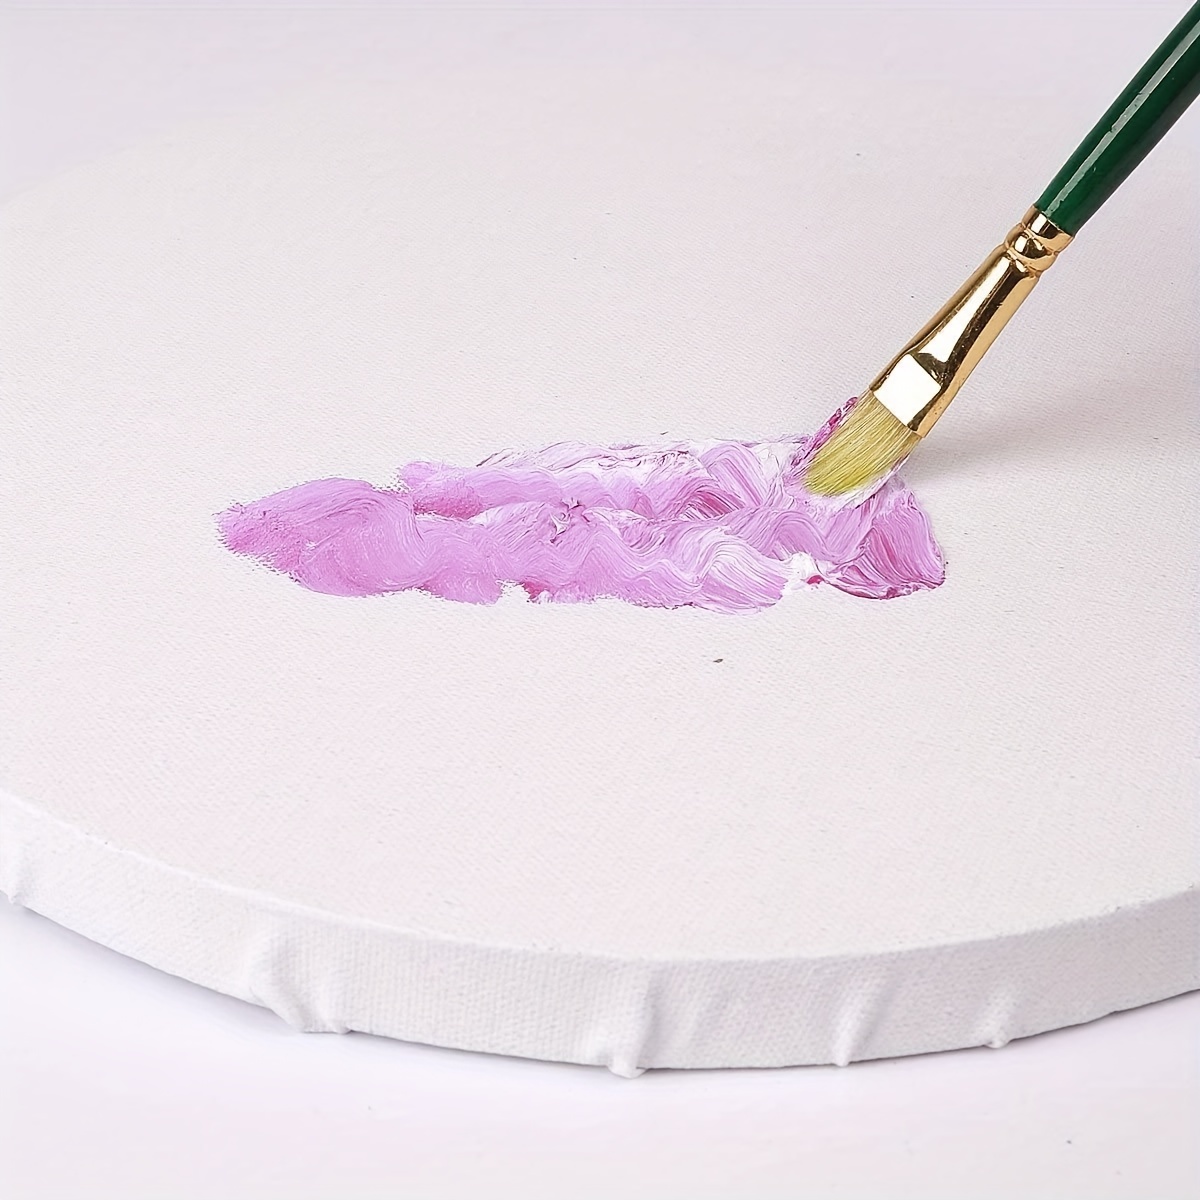 Round Canvas For Painting, Pre Stretched Cotton Canvas Boards